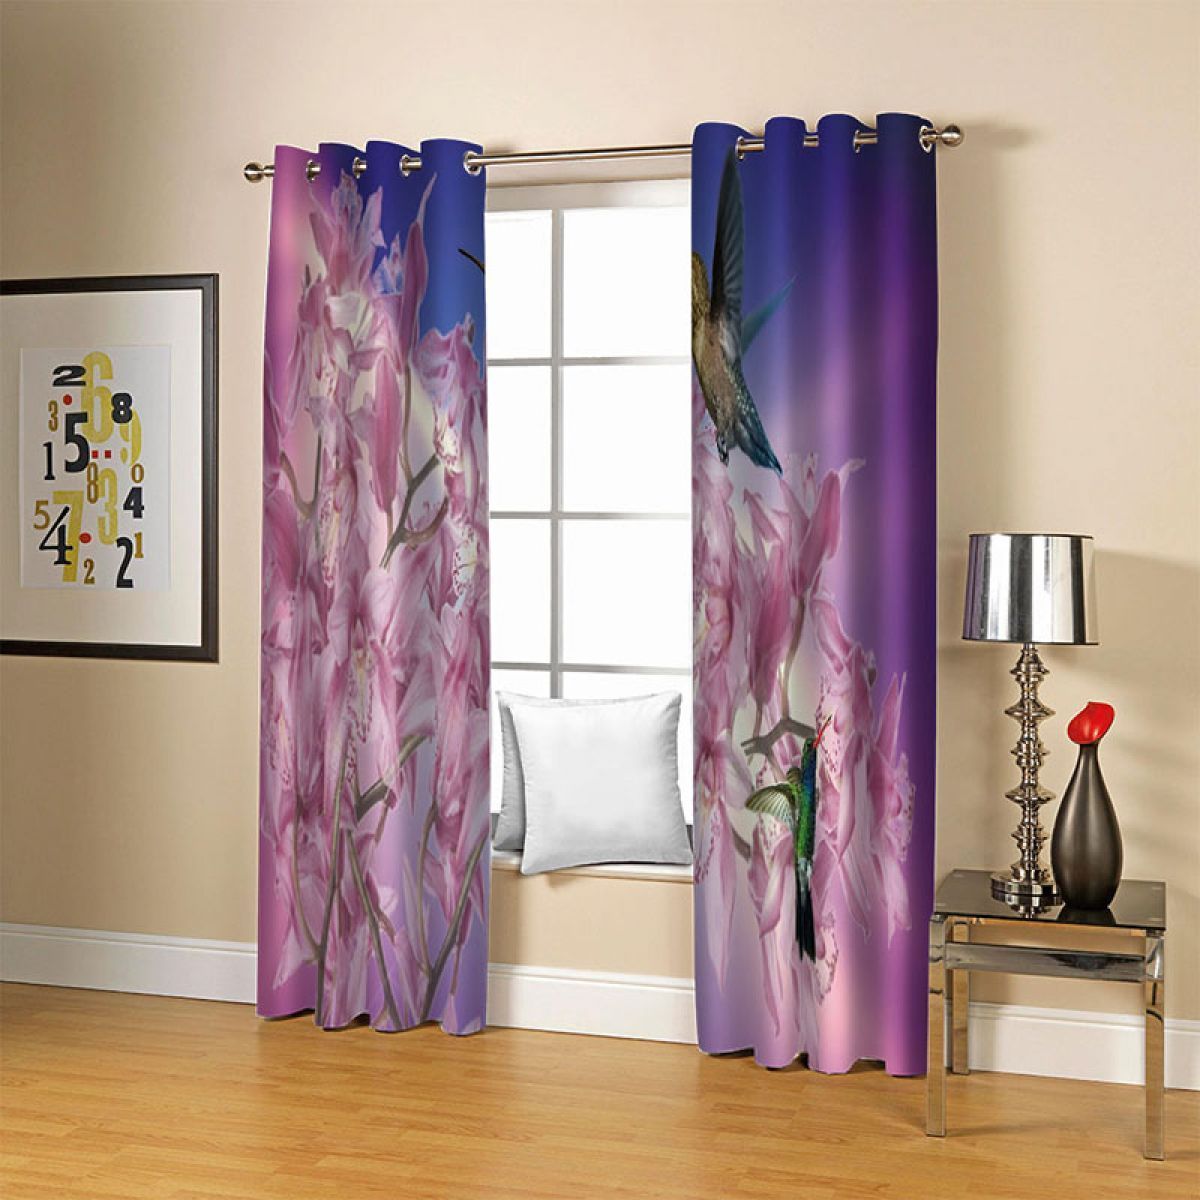 3d Birds And Flowers Printed Window Curtain Home Decor